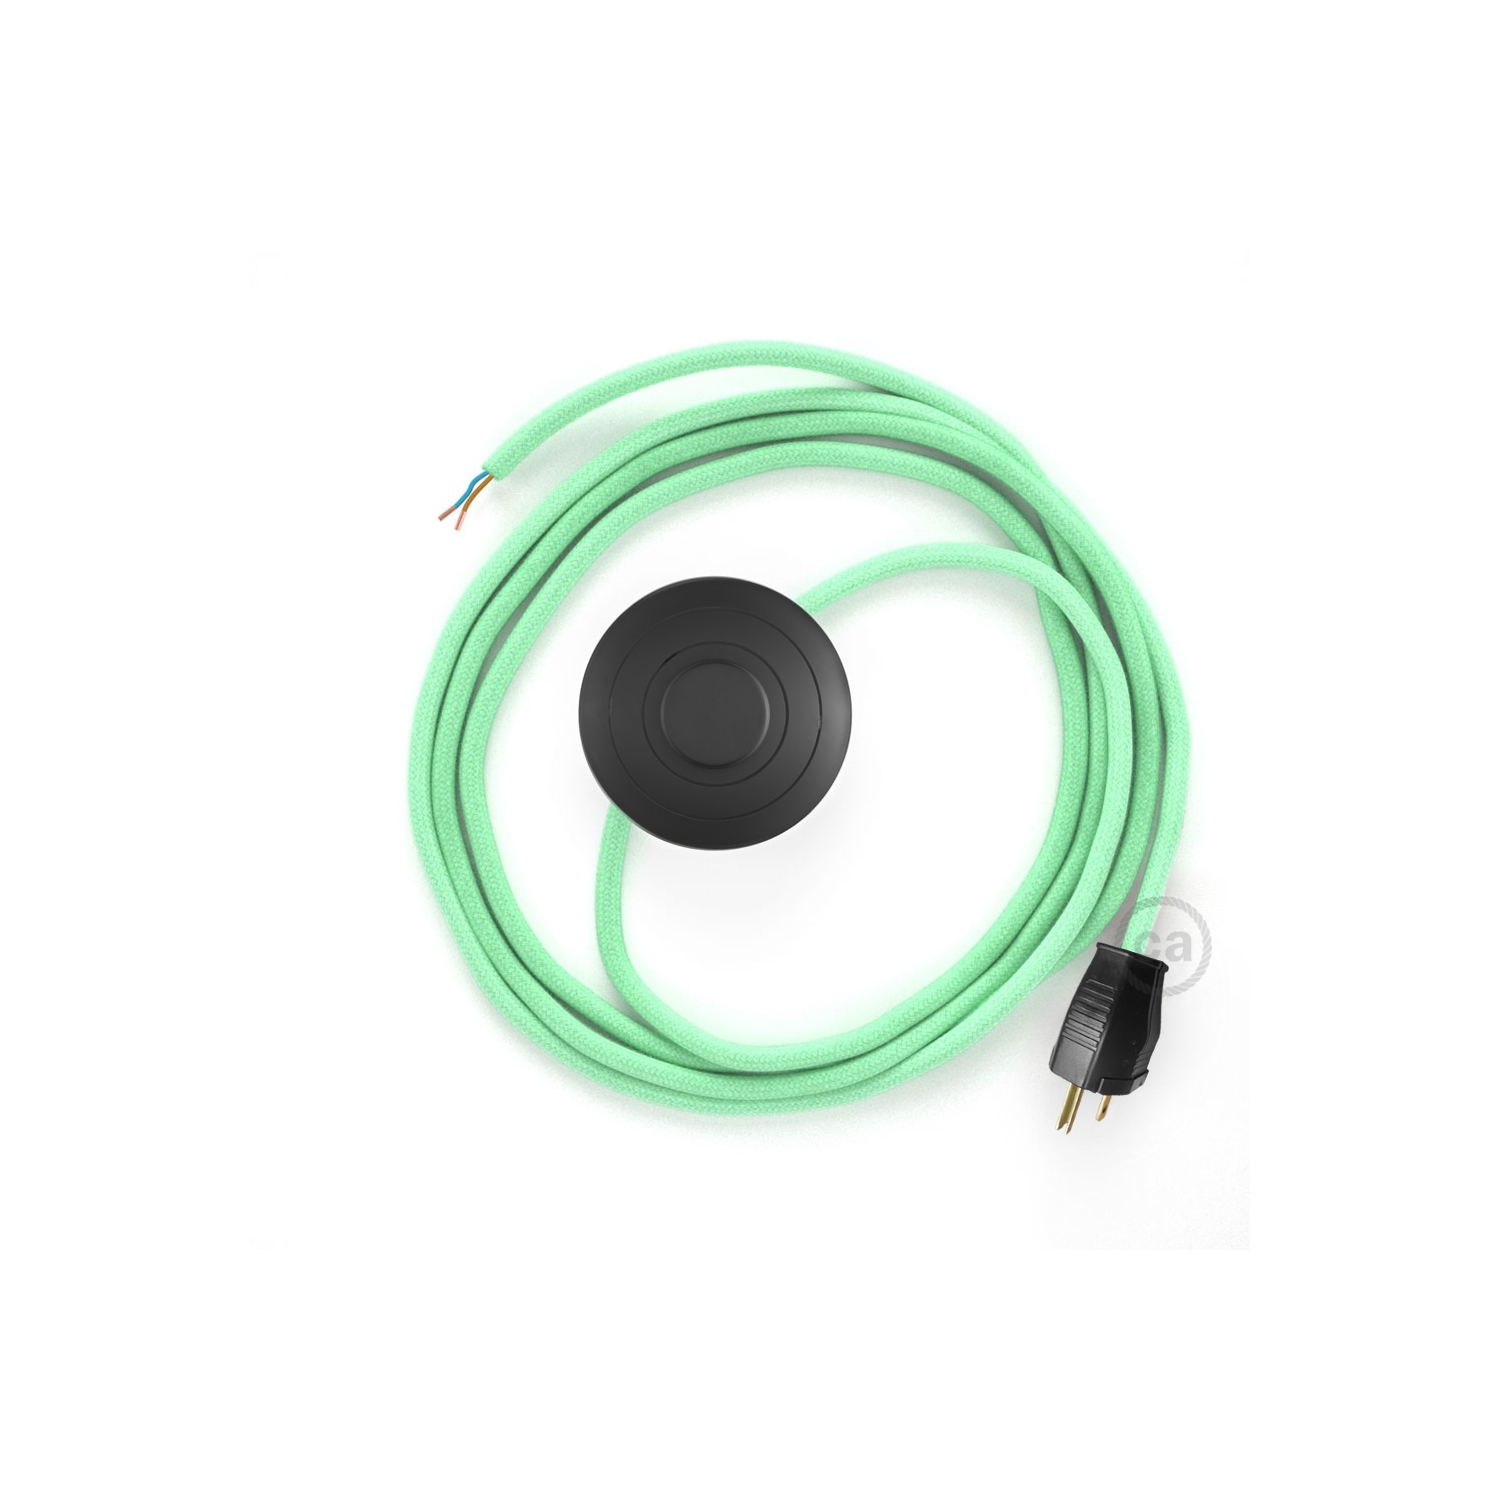 Power Cord with foot switch, RC34 Mint Green Cotton - Choose color of switch/plug